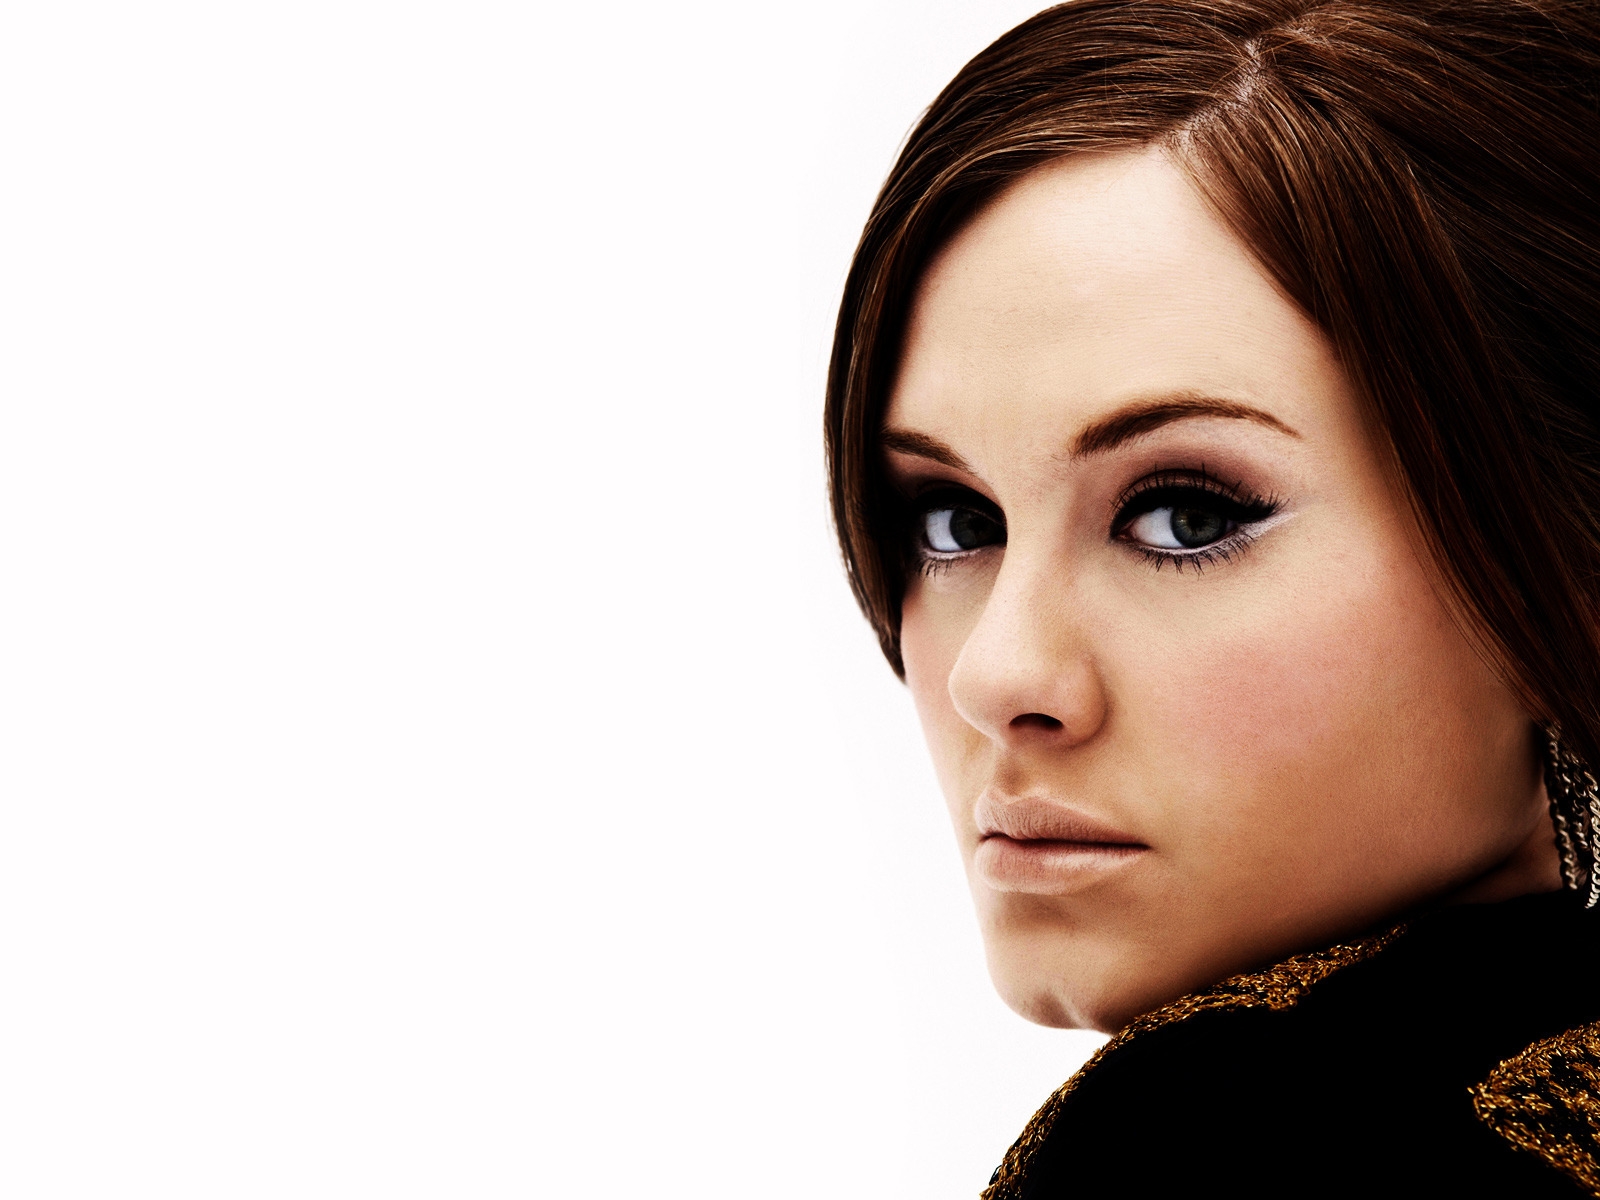 Adele Look for 1600 x 1200 resolution